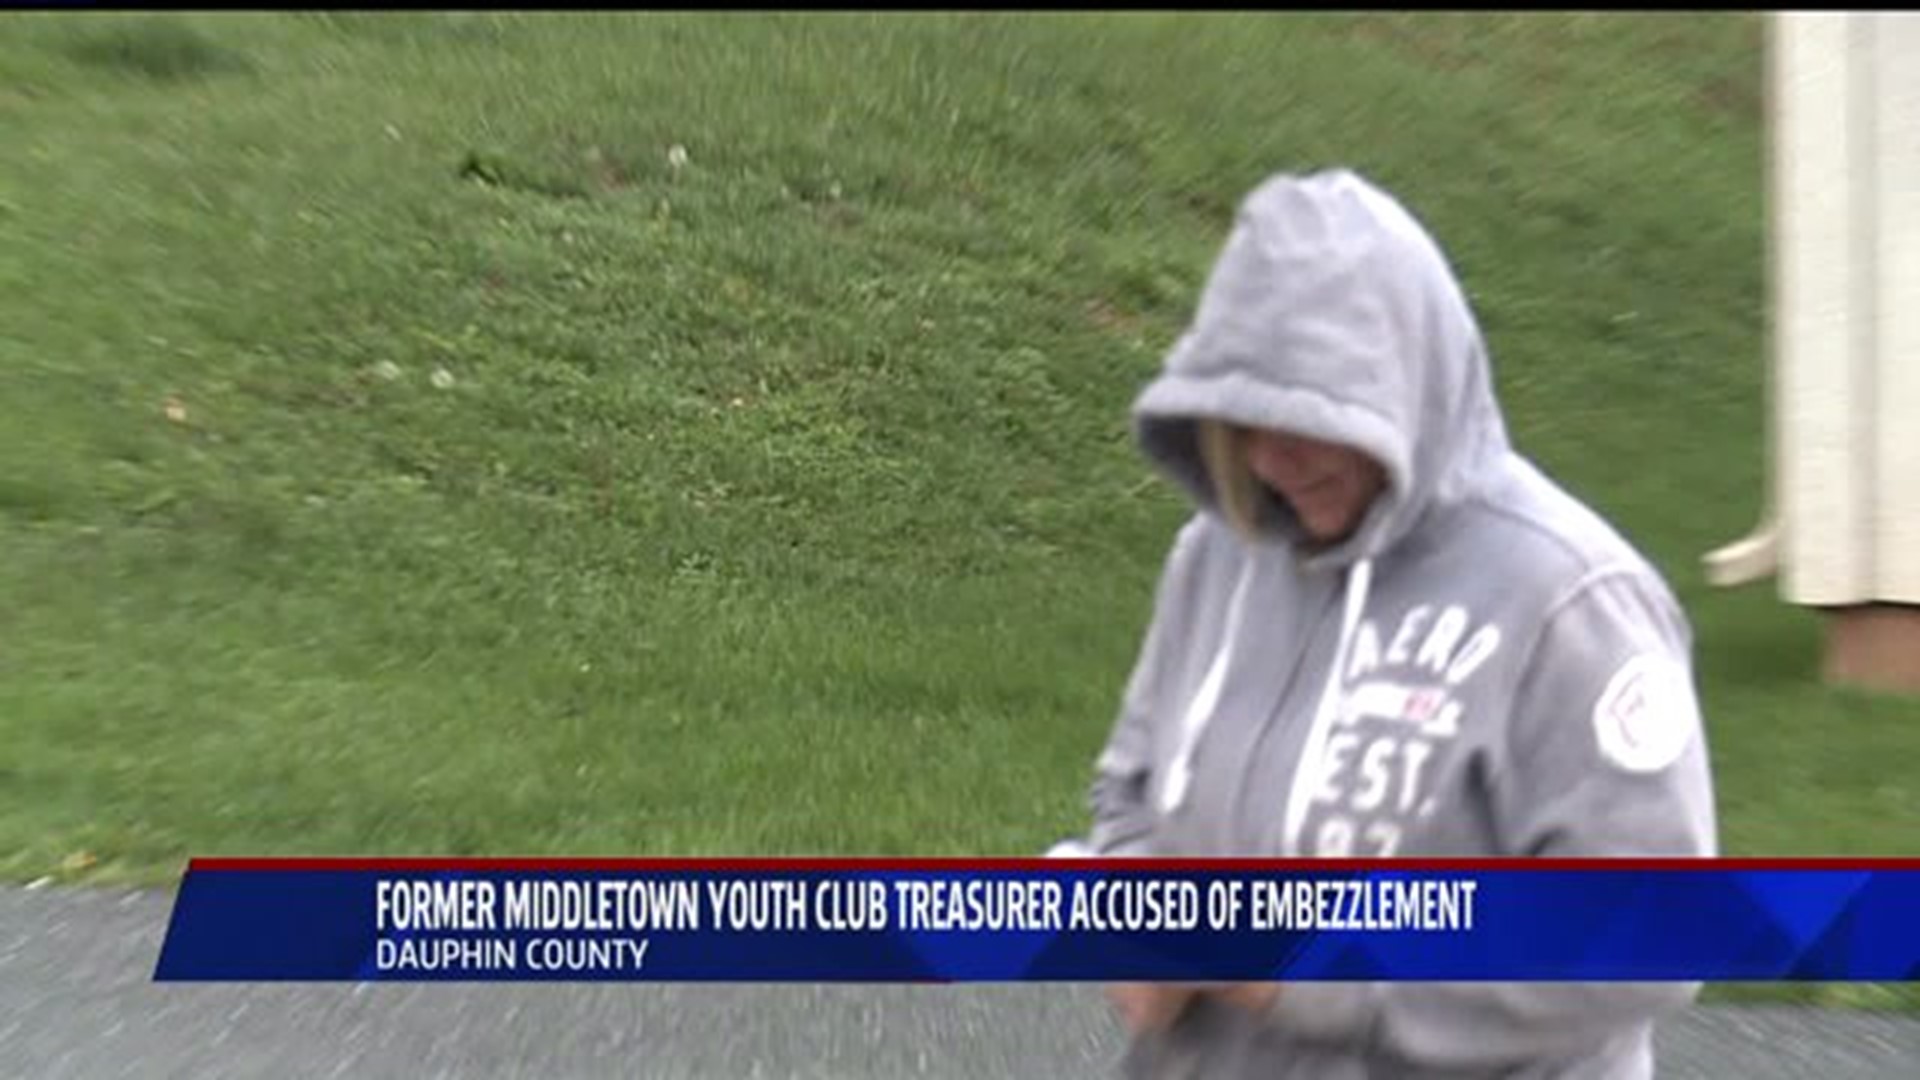 Former Middletown youth club treasurer accused of embezzlement